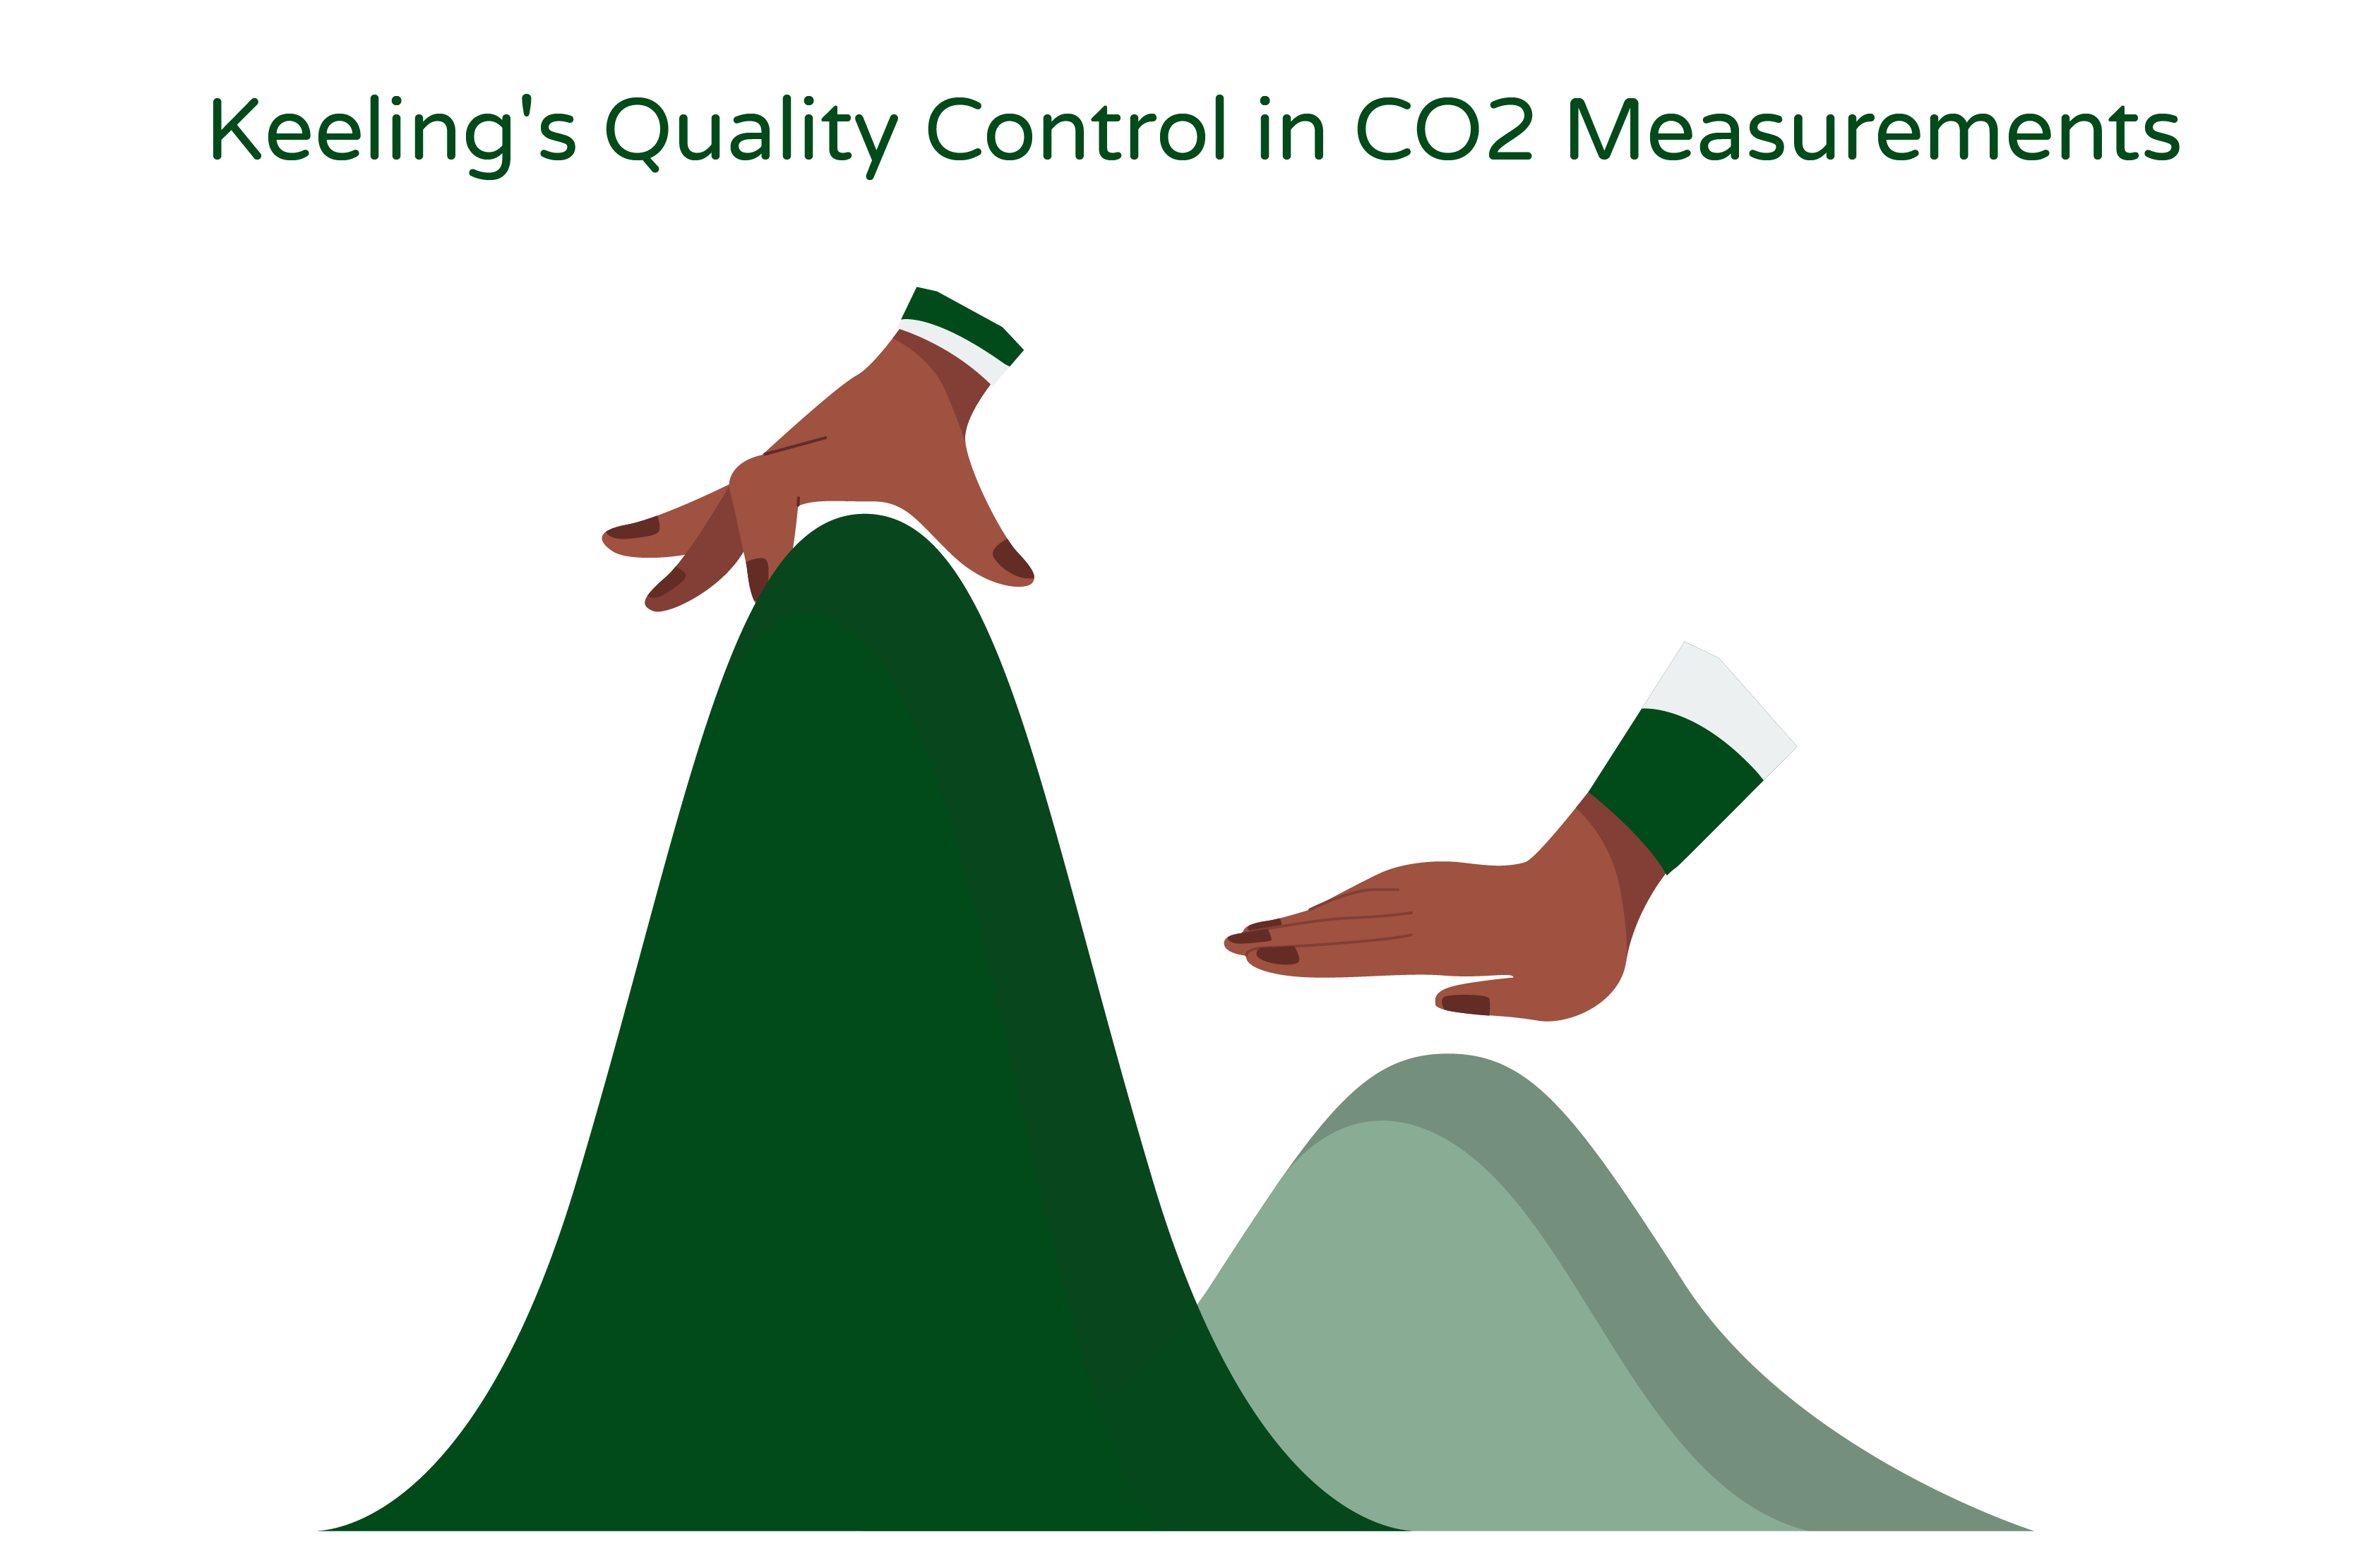 Illustration titled 'Keeling's Quality Control in CO2 Measurements' showcases two slopes of graphs with hands representing meticulous monitoring and calibration of CO2 measurements."  The illustration depicts two graph slopes representing the measurement of carbon dioxide (CO2) concentrations over time. Each slope is accompanied by a hand symbol placed on it.  The first slope shows an upward trend, indicating an increase in CO2 concentration. A hand symbol is positioned on this slope, representing the careful monitoring and data collection process pioneered by Charles David Keeling. The hand signifies the continuous measurement and tracking of CO2 levels, ensuring the accuracy and reliability of the data.  The second slope shows a more precise and calibrated curve, indicating the quality control aspect of Keeling's work. Another hand symbol is placed on this slope, representing the meticulous calibration and validation process conducted by researchers. This process involves comparing the measurements with reference standards, performing data validation, and ensuring the accuracy of the recorded CO2 concentrations.  The purpose of the illustration is to showcase Keeling's commitment to quality control in CO2 measurements. It emphasizes the ongoing monitoring and measurement of CO2 levels, as well as the rigorous calibration and validation processes that Keeling implemented. These efforts are essential for maintaining the integrity of CO2 data and providing reliable information for climate change research and understanding the long-term trends in atmospheric CO2 concentrations.